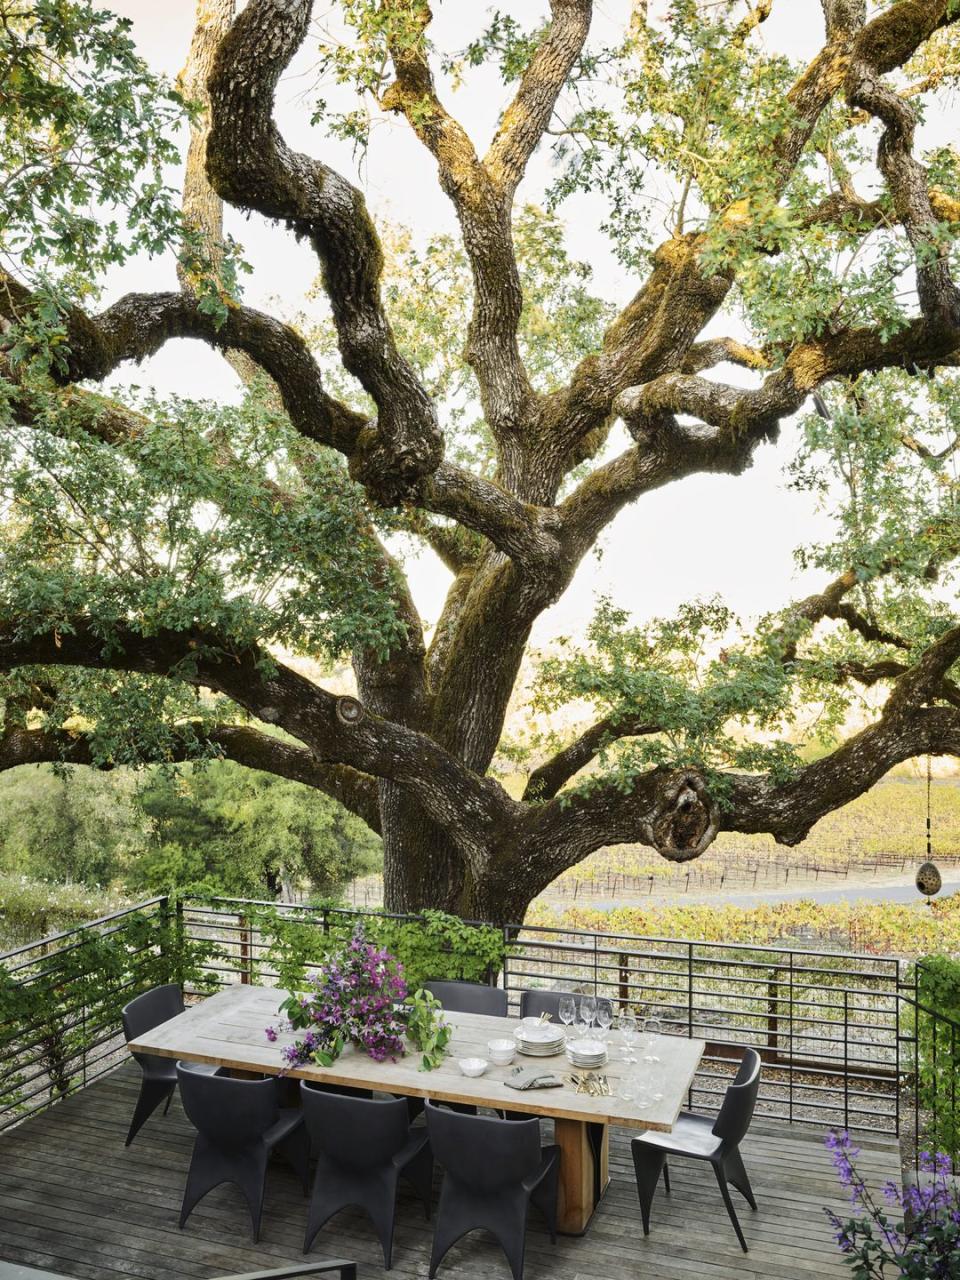 a coastal live oak shades an ipe dining deck overlooking the vineyards and forged steel and glass railings preserve the view